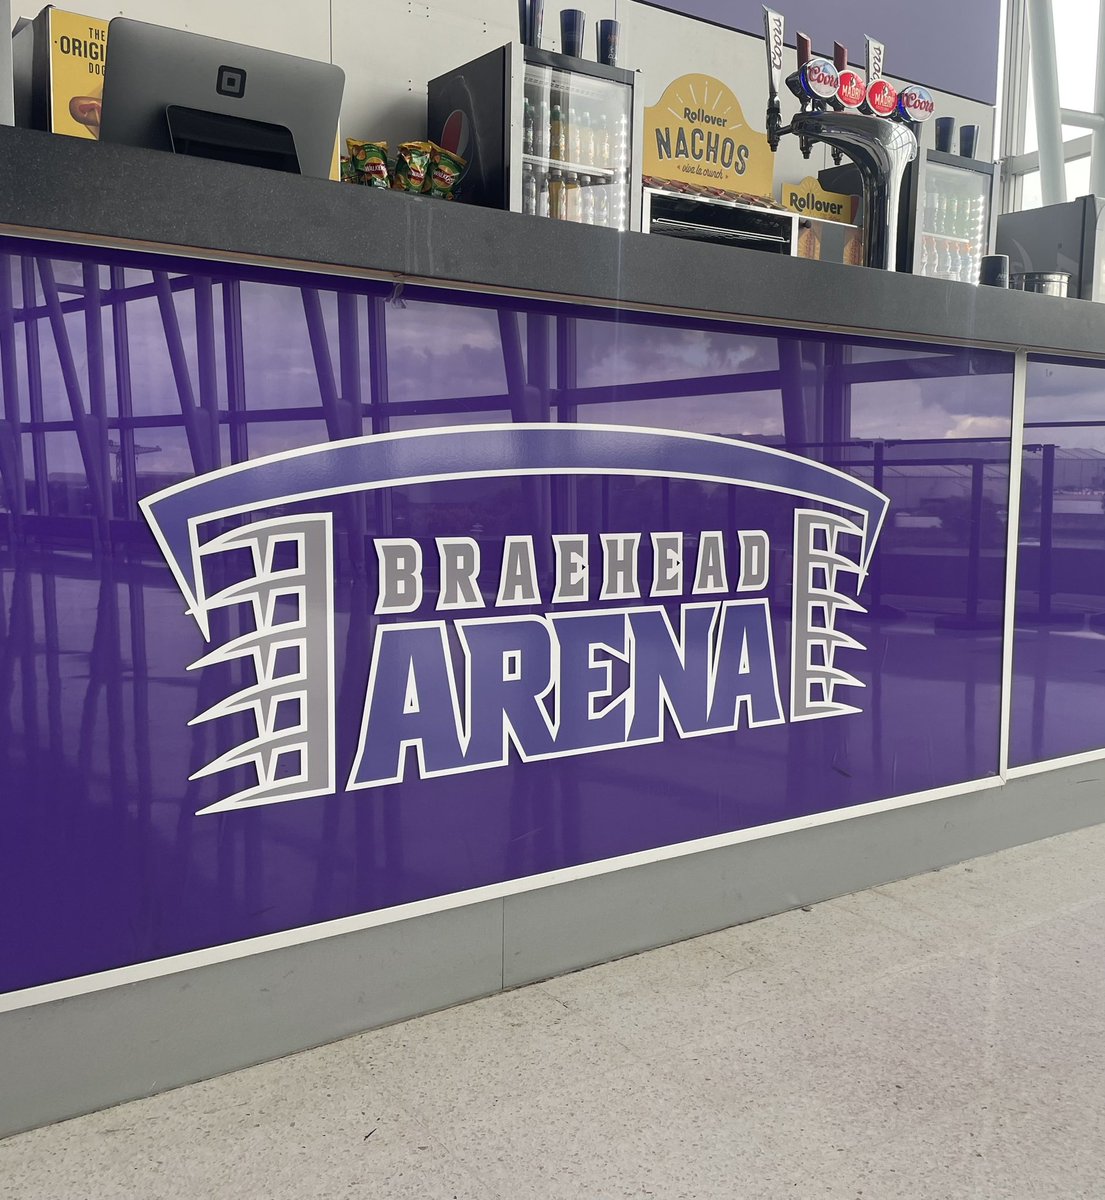 🤩 | Our bar area in the Arena foyer is certainly looking the part 💜 Thanks to our friends at @CRE8IVEGlasgow for all their creation 👏🏻